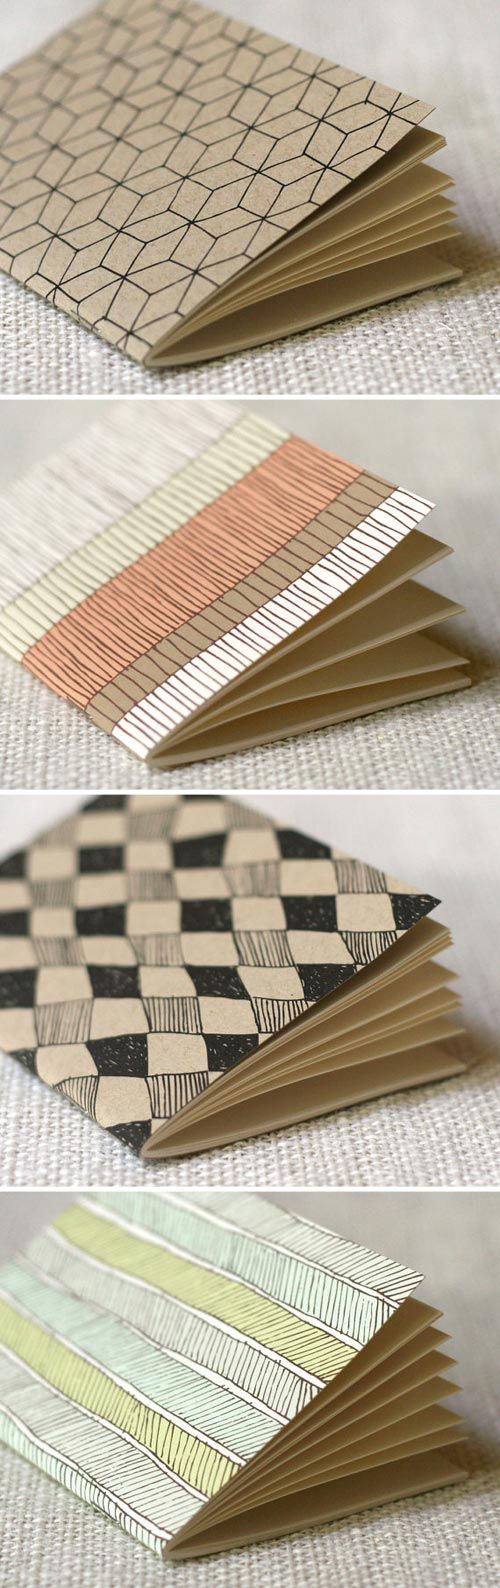 Notebooks covers that look artful. made these with old wallpaper books and sewed